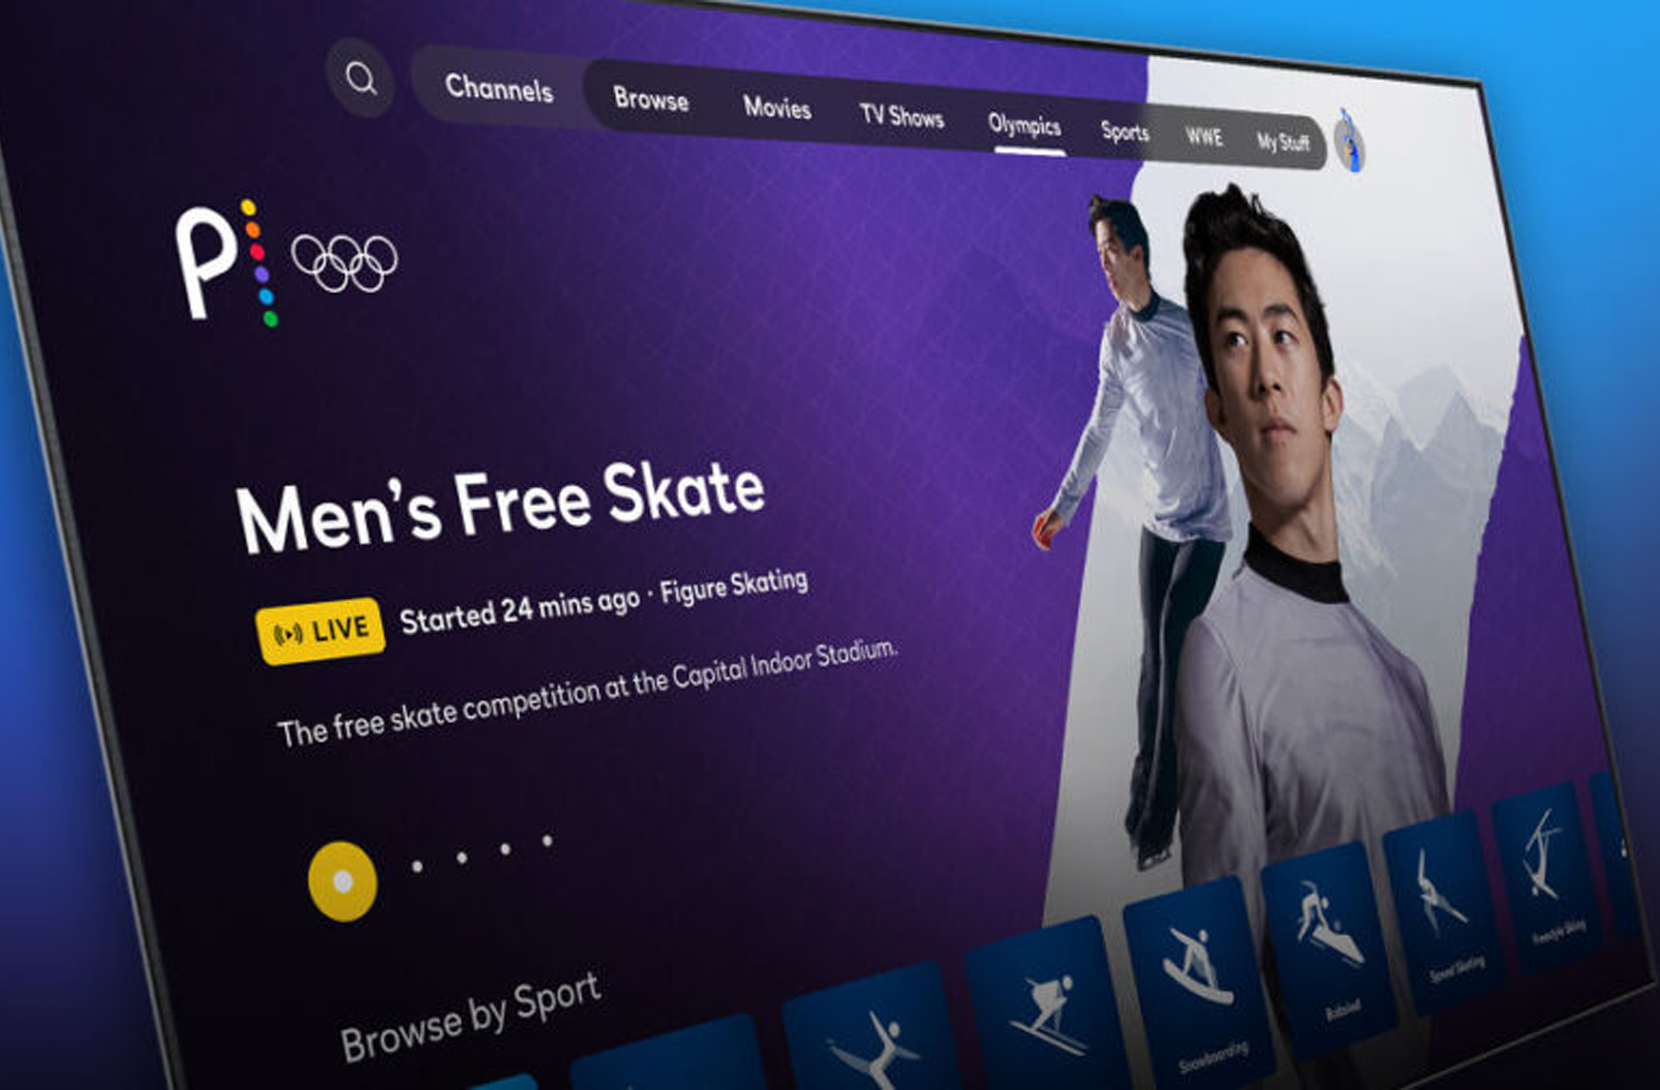 Your Guide To Streaming The Winter Olympics On Peacock NBCUNIVERSAL MEDIA